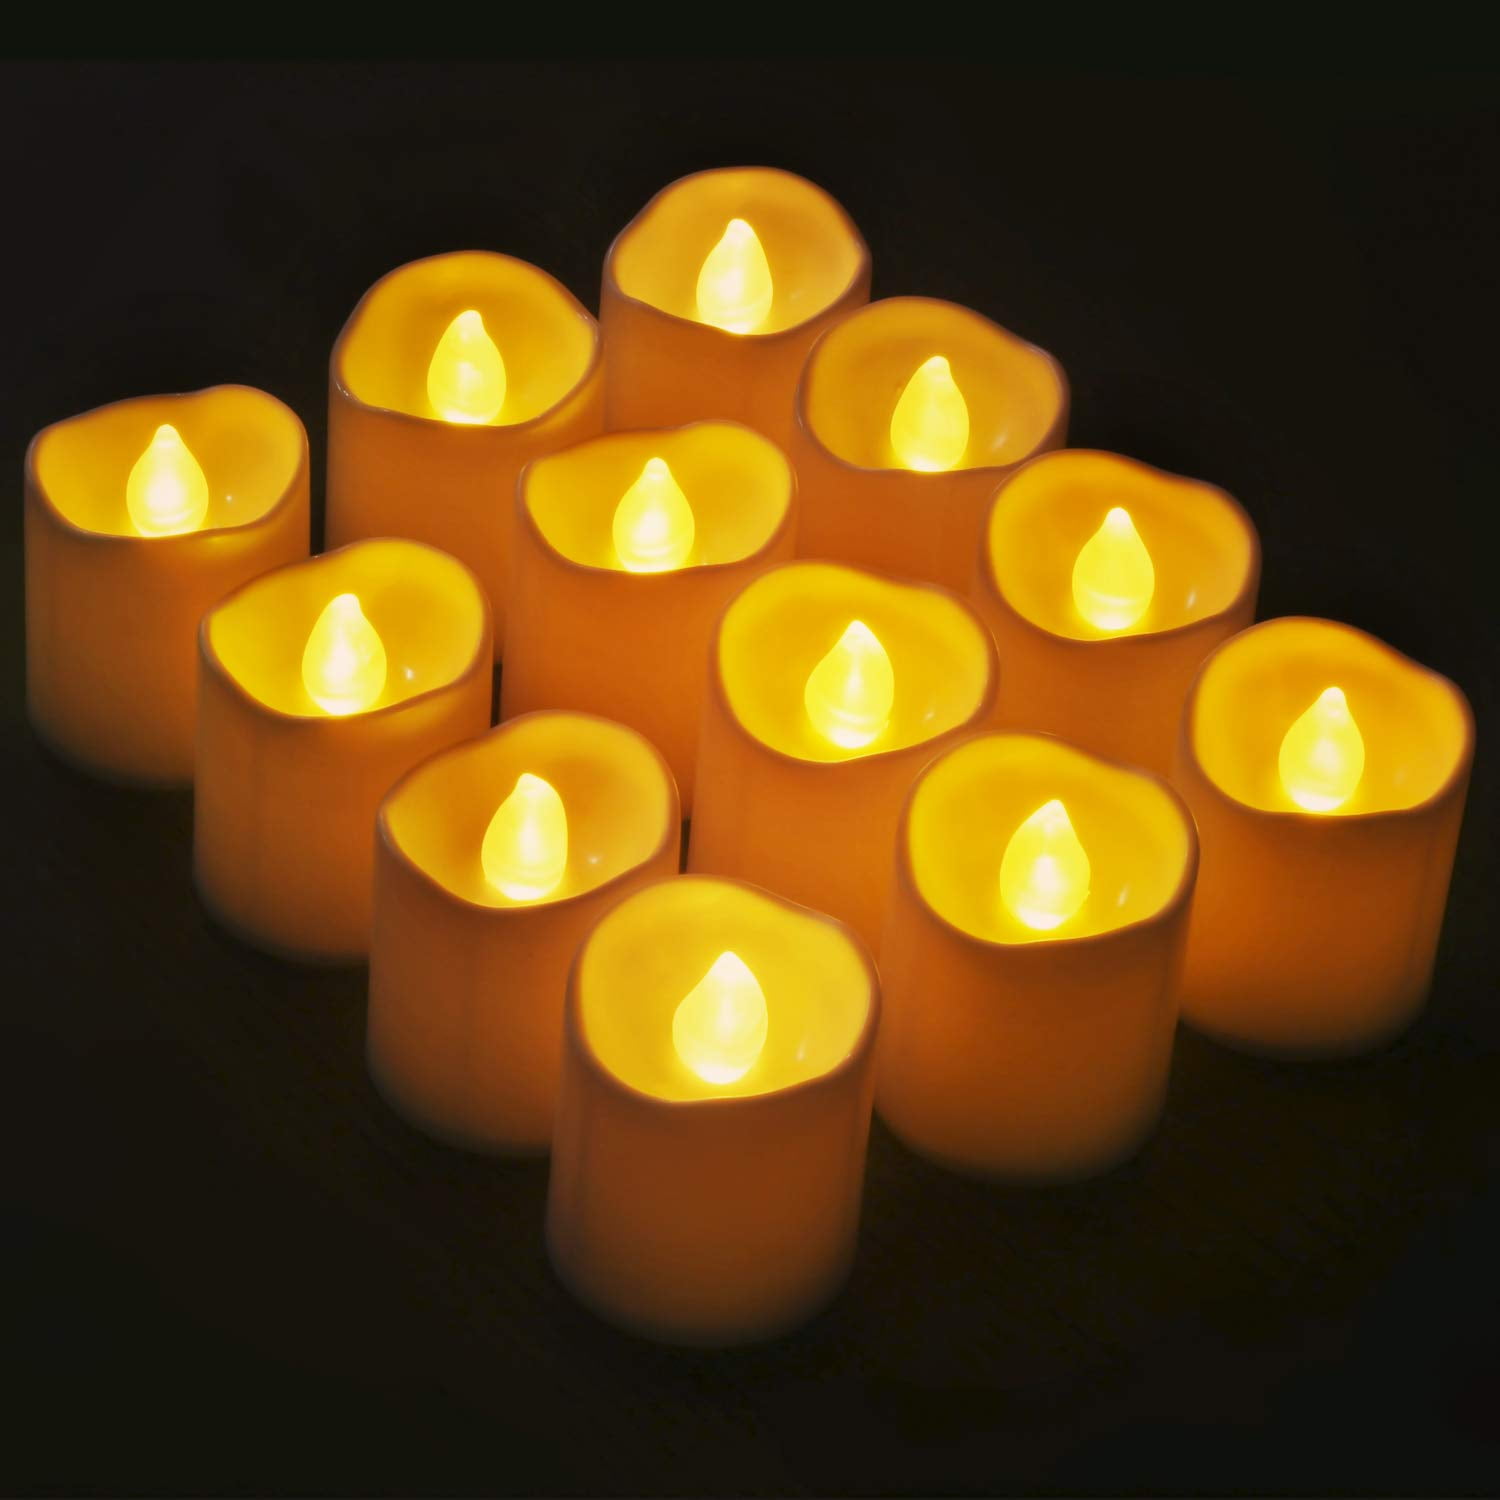 12 PCS Flameless Votive Candles Battery Operated Flickering LED Tea Light 